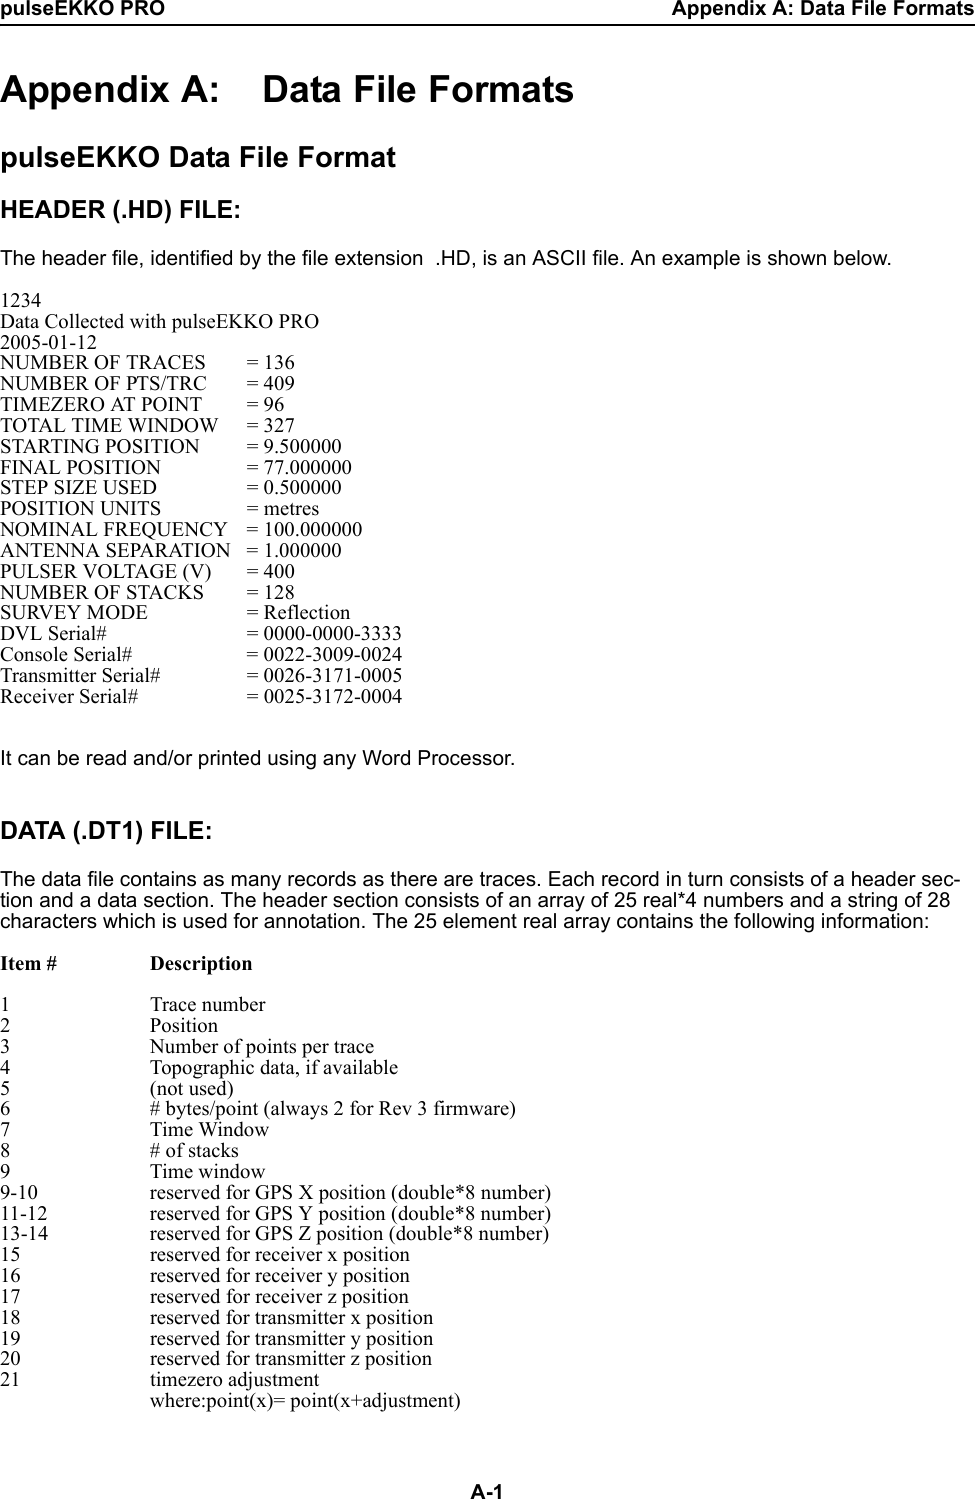 pulseEKKO PRO Appendix A: Data File FormatsA-1Appendix A:  Data File FormatspulseEKKO Data File FormatHEADER (.HD) FILE:The header file, identified by the file extension  .HD, is an ASCII file. An example is shown below.1234Data Collected with pulseEKKO PRO2005-01-12 NUMBER OF TRACES   = 136 NUMBER OF PTS/TRC   = 409 TIMEZERO AT POINT   = 96 TOTAL TIME WINDOW = 327 STARTING POSITION   = 9.500000 FINAL POSITION      = 77.000000 STEP SIZE USED      = 0.500000 POSITION UNITS     = metres NOMINAL FREQUENCY  = 100.000000 ANTENNA SEPARATION  = 1.000000 PULSER VOLTAGE (V)  = 400 NUMBER OF STACKS    = 128 SURVEY MODE         = ReflectionDVL Serial# = 0000-0000-3333Console Serial# = 0022-3009-0024Transmitter Serial# = 0026-3171-0005Receiver Serial# = 0025-3172-0004It can be read and/or printed using any Word Processor.DATA (.DT1) FILE:The data file contains as many records as there are traces. Each record in turn consists of a header sec-tion and a data section. The header section consists of an array of 25 real*4 numbers and a string of 28 characters which is used for annotation. The 25 element real array contains the following information:Item # Description1 Trace number2 Position3 Number of points per trace4 Topographic data, if available5 (not used)6 # bytes/point (always 2 for Rev 3 firmware)7 Time Window8 # of stacks9 Time window9-10 reserved for GPS X position (double*8 number)11-12 reserved for GPS Y position (double*8 number)13-14 reserved for GPS Z position (double*8 number)15 reserved for receiver x position16 reserved for receiver y position17 reserved for receiver z position18 reserved for transmitter x position19 reserved for transmitter y position20 reserved for transmitter z position21 timezero adjustmentwhere:point(x)= point(x+adjustment)